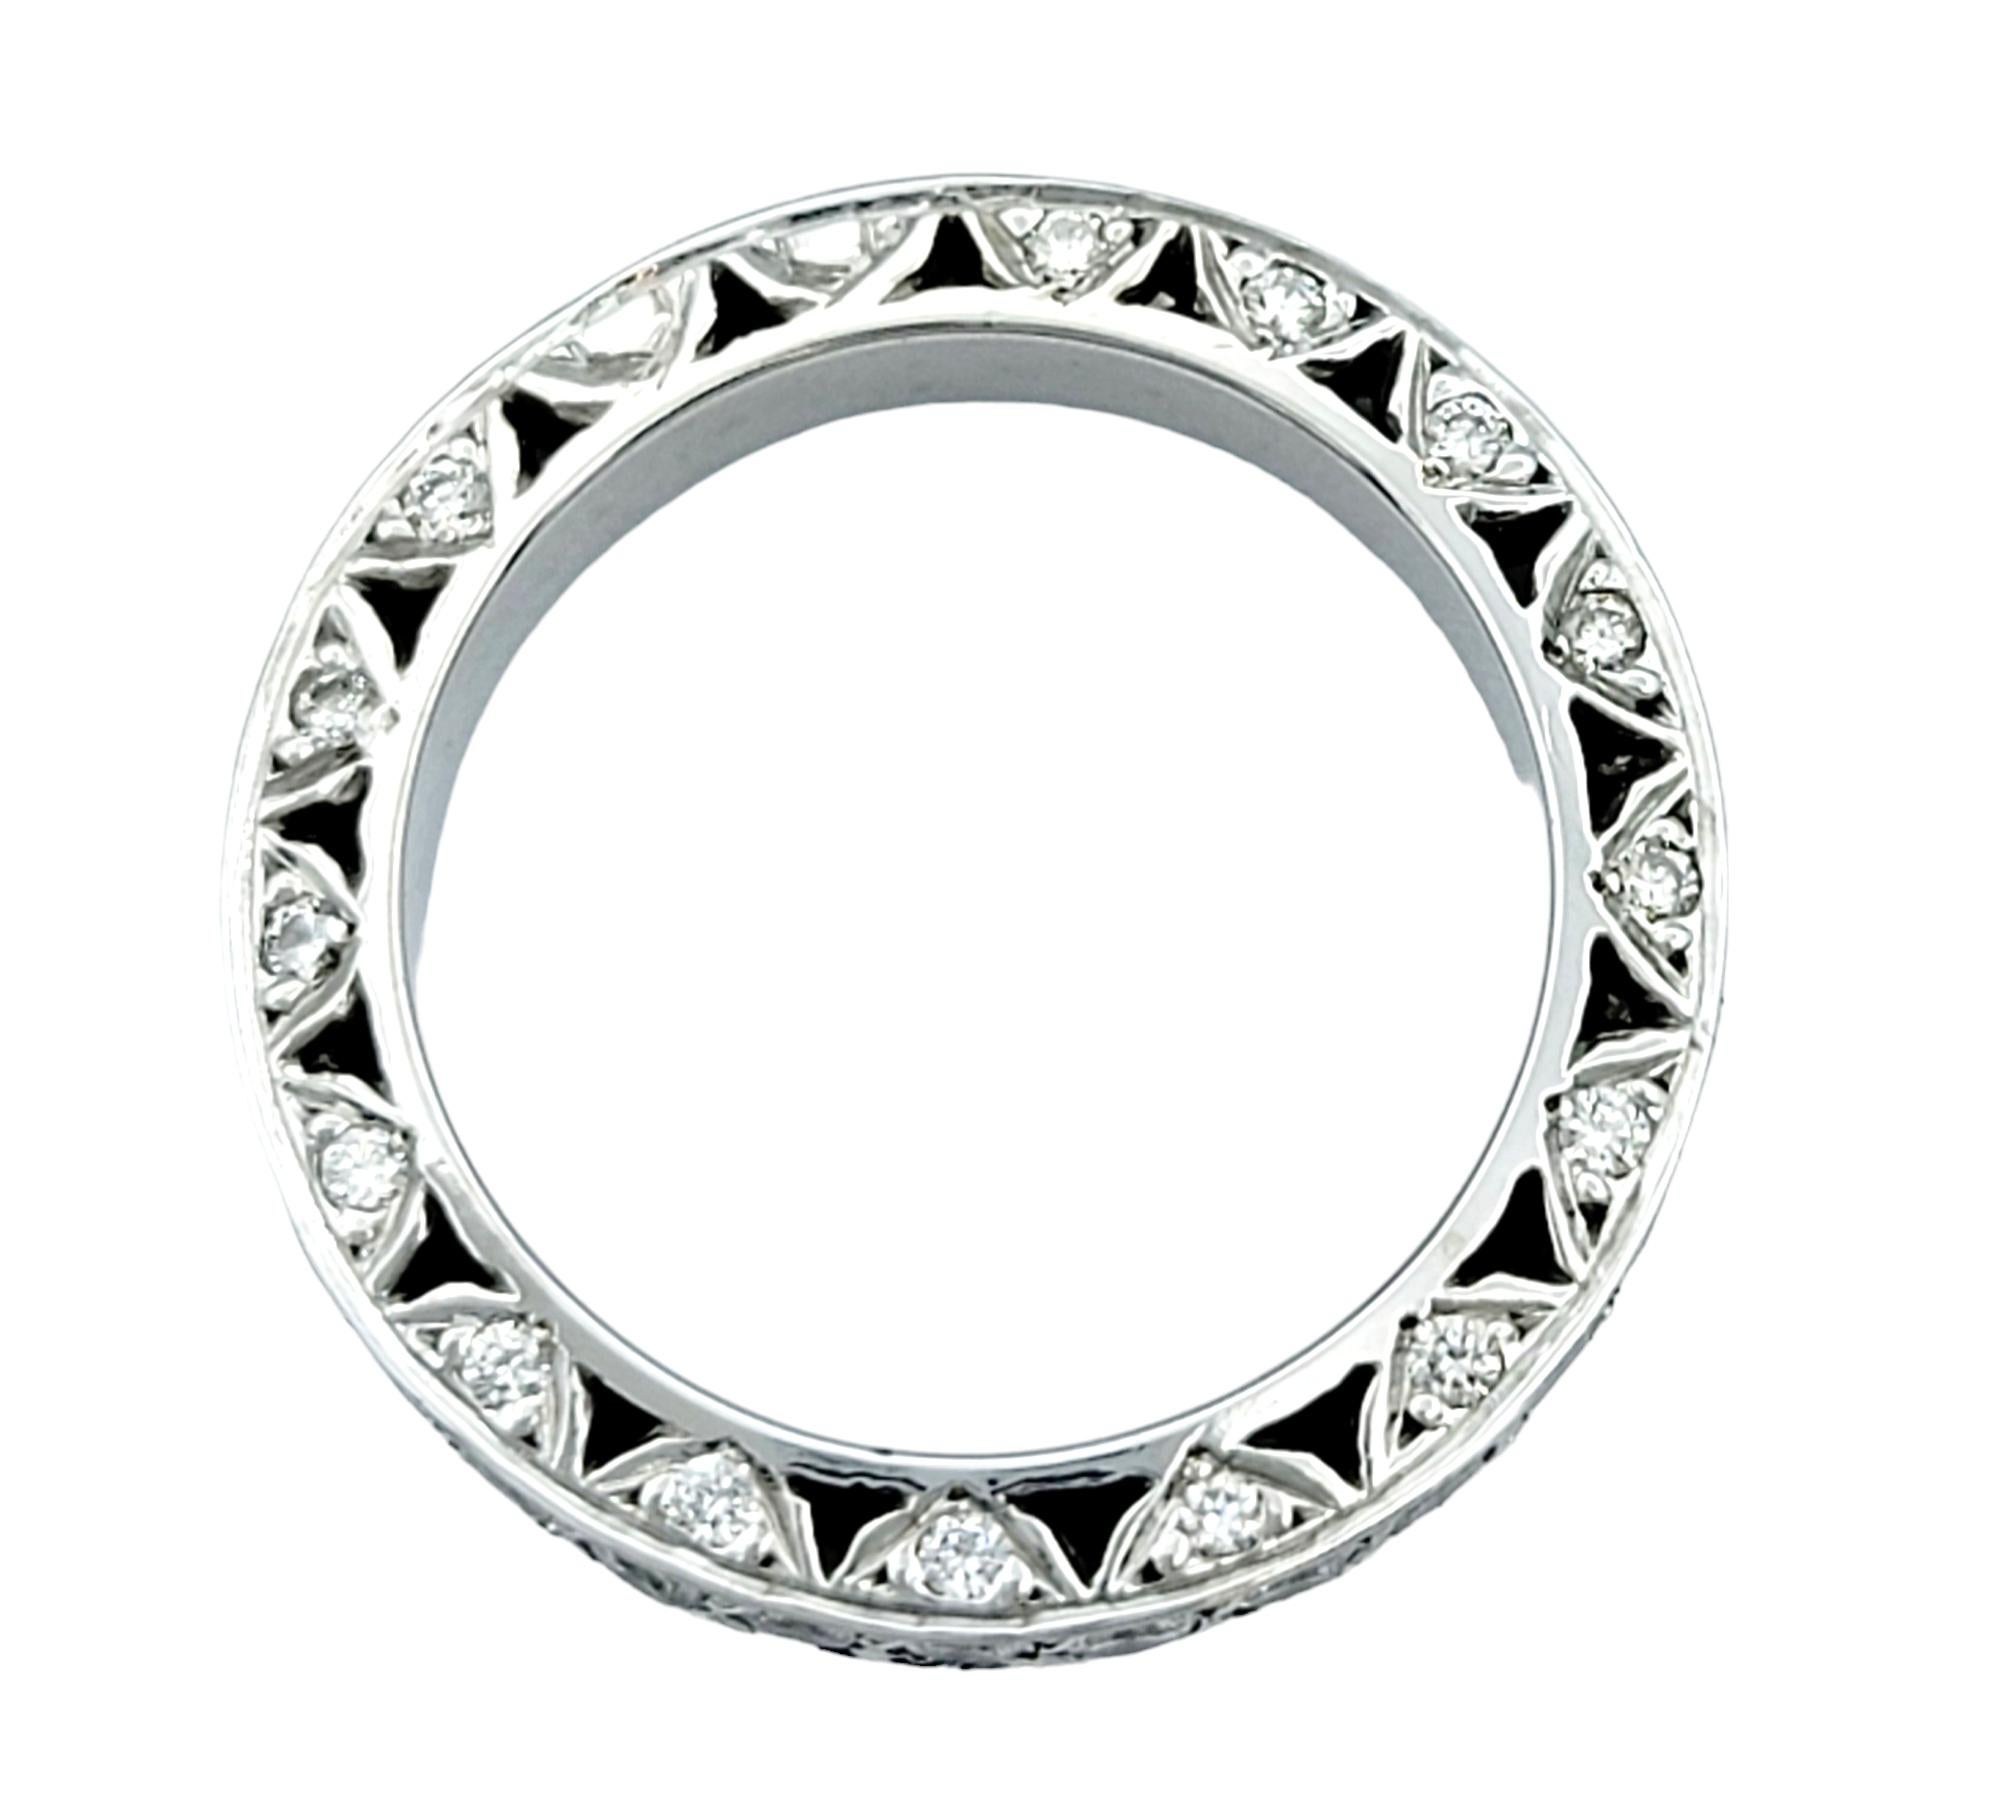 Round Diamond Encrusted Eternity Style Band Ring Set in 19 Karat White Gold In Good Condition For Sale In Scottsdale, AZ